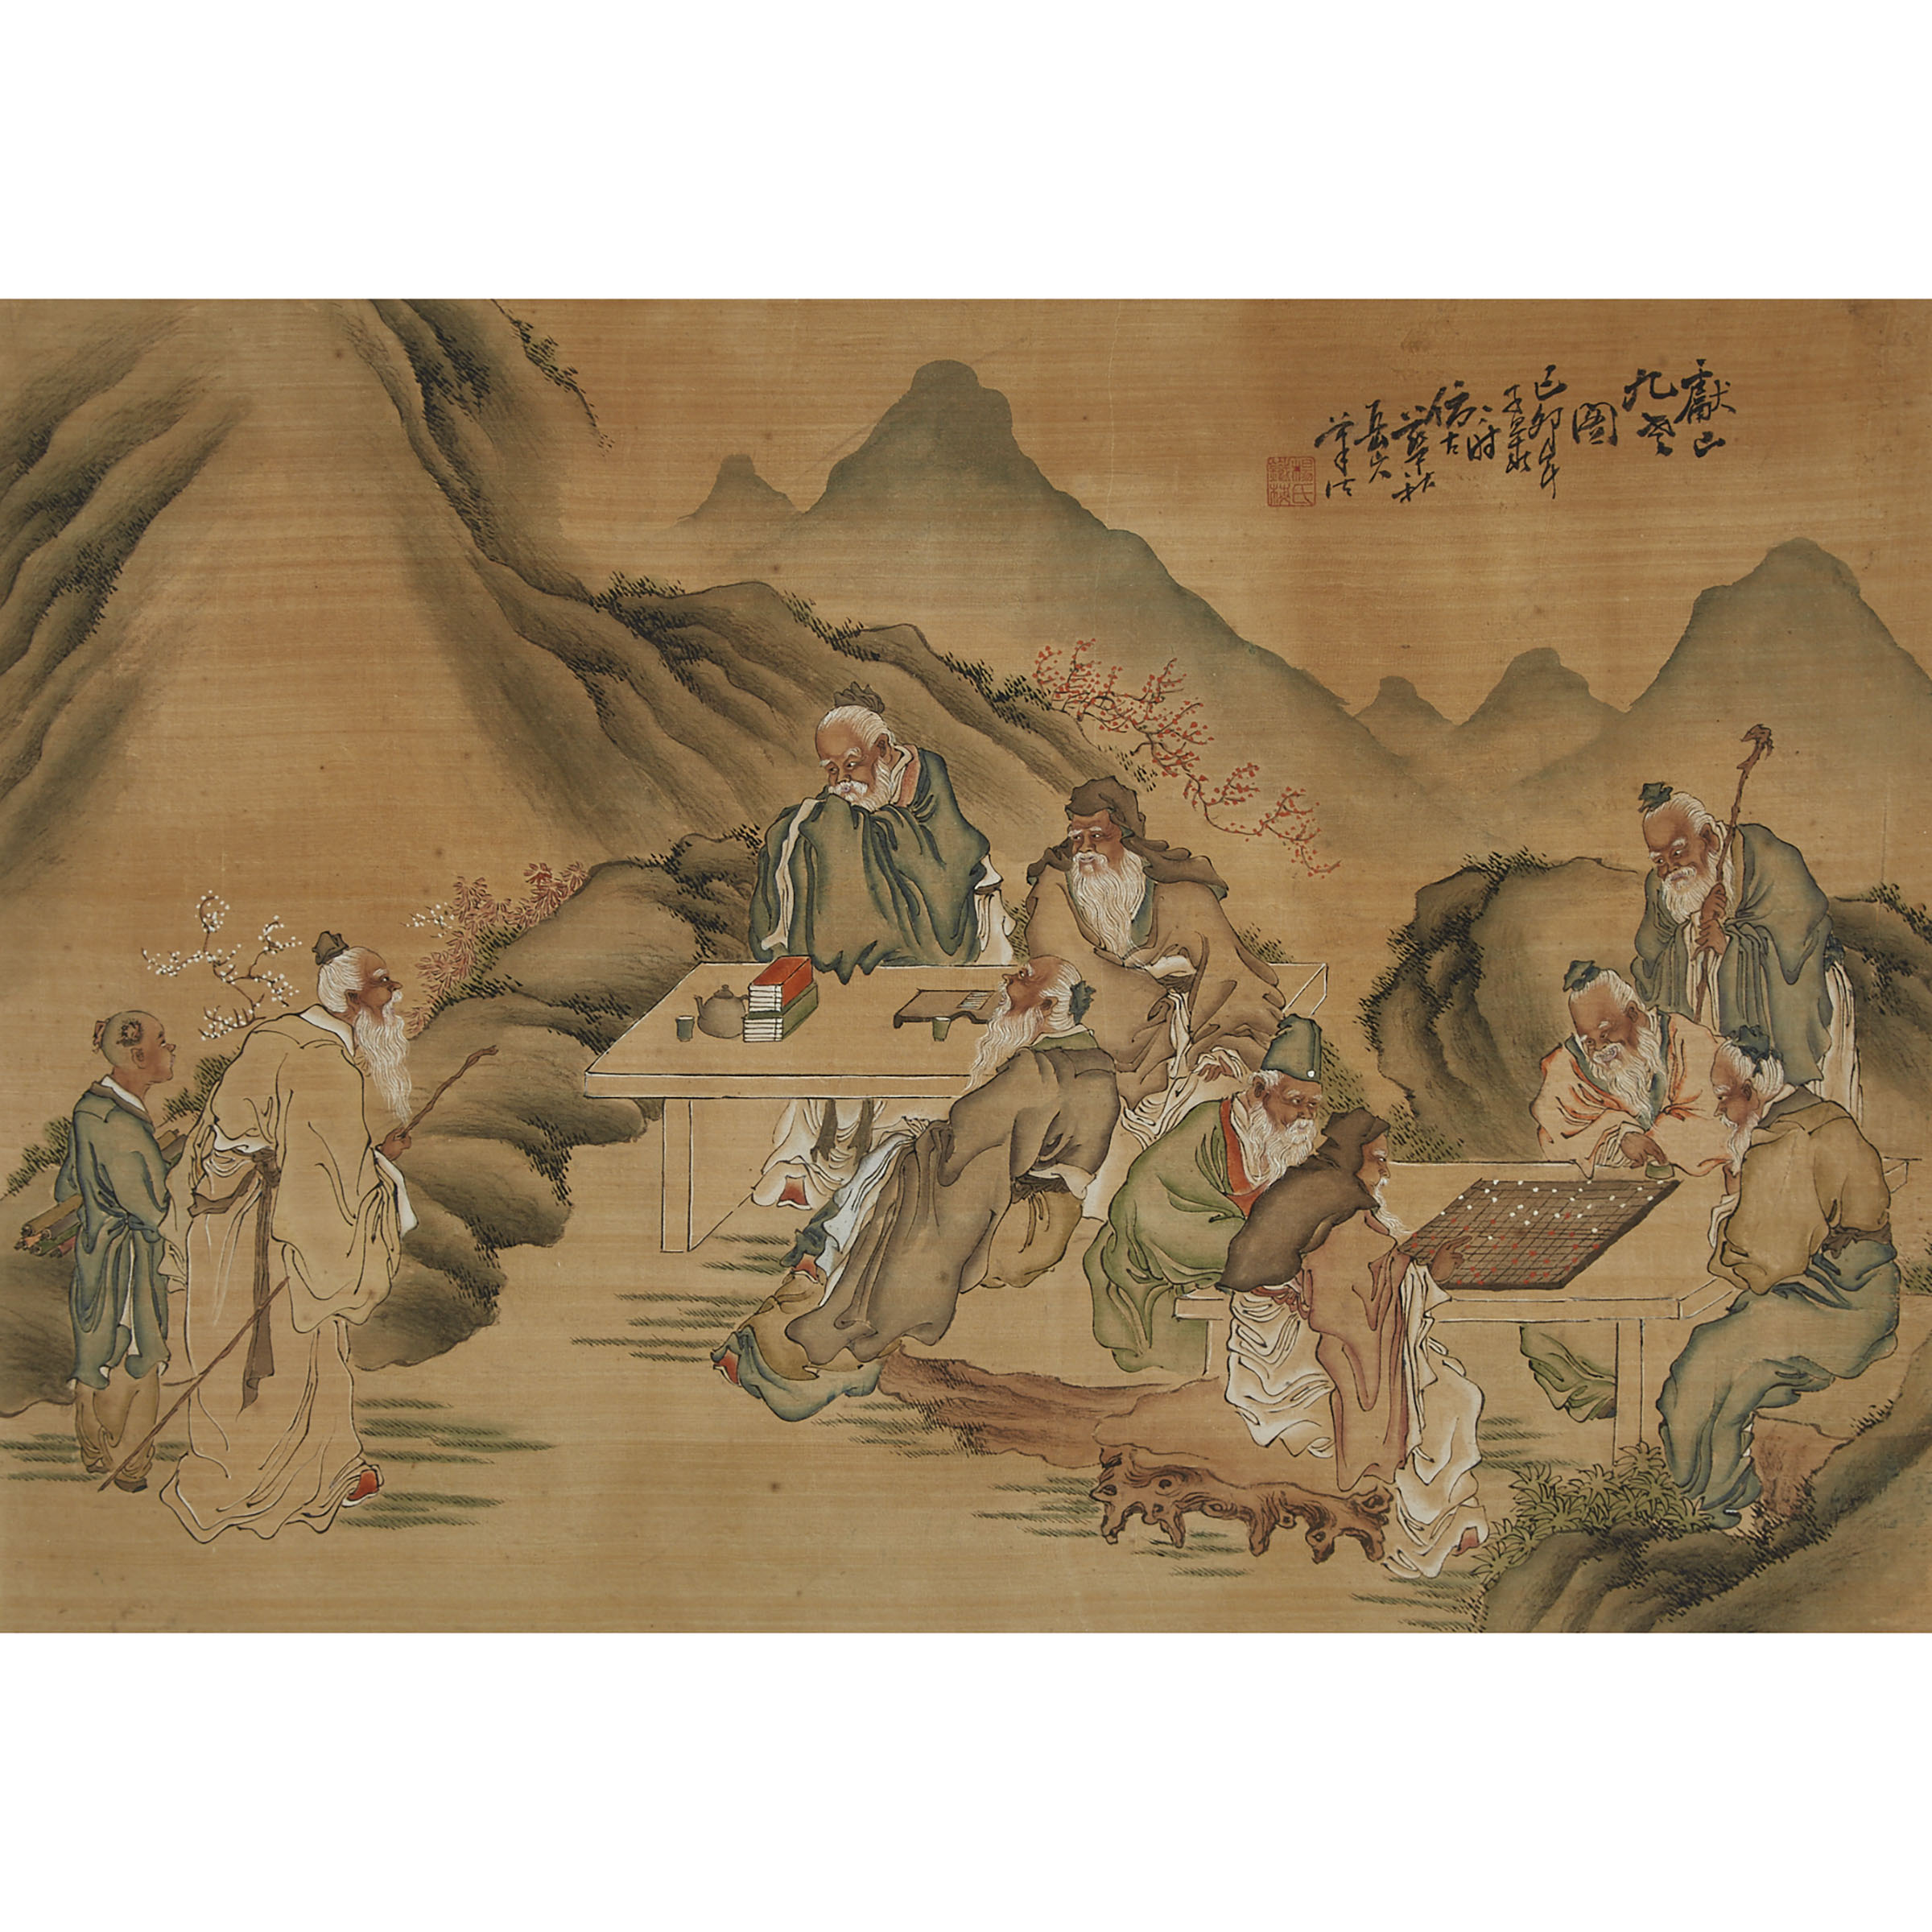 A Chinese Figural Painting, Signed Yang Tiemei, Possibly Dated 1939